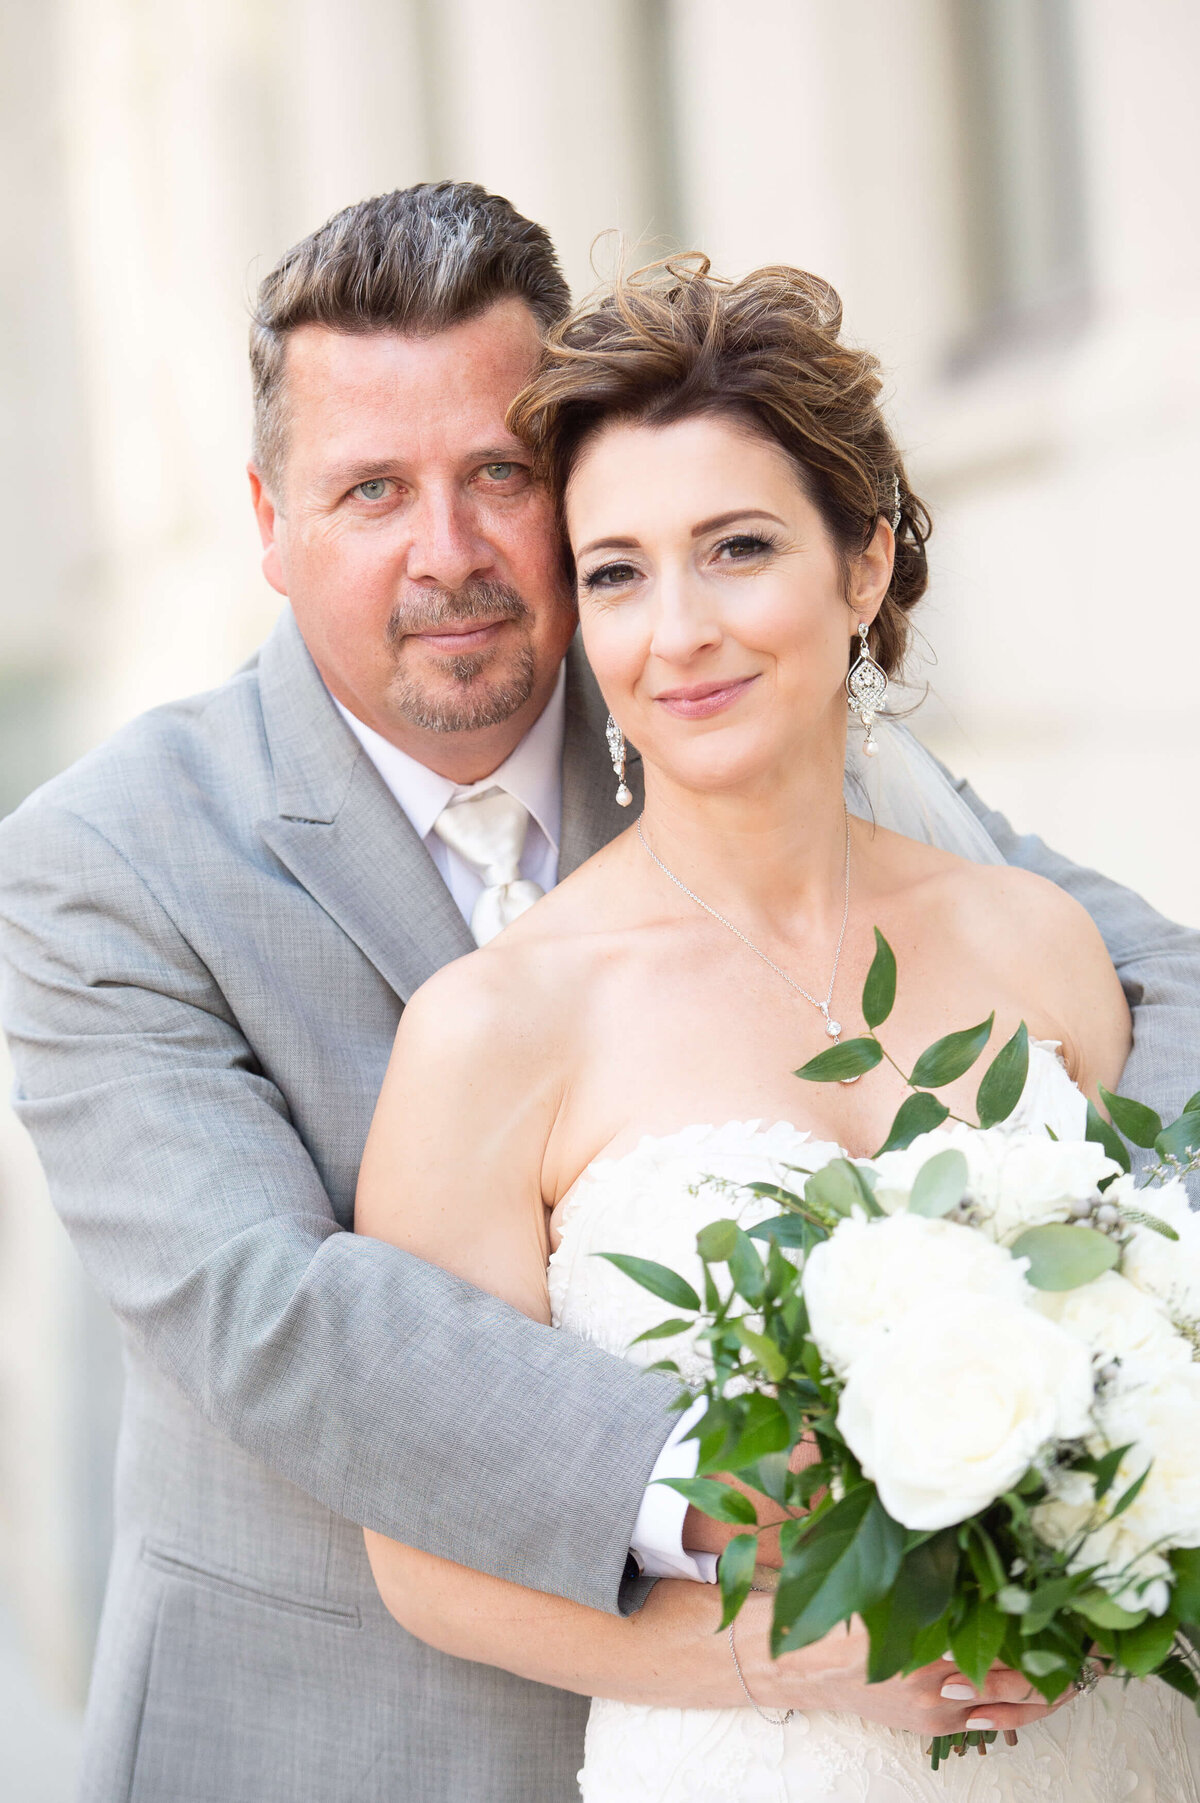 a classic portrait of an elegant bride and groom taken outside the Chateau Laurier wedding venue in Ottawa.  Captured by Ottawa wedding photographer JEMMAN Photography